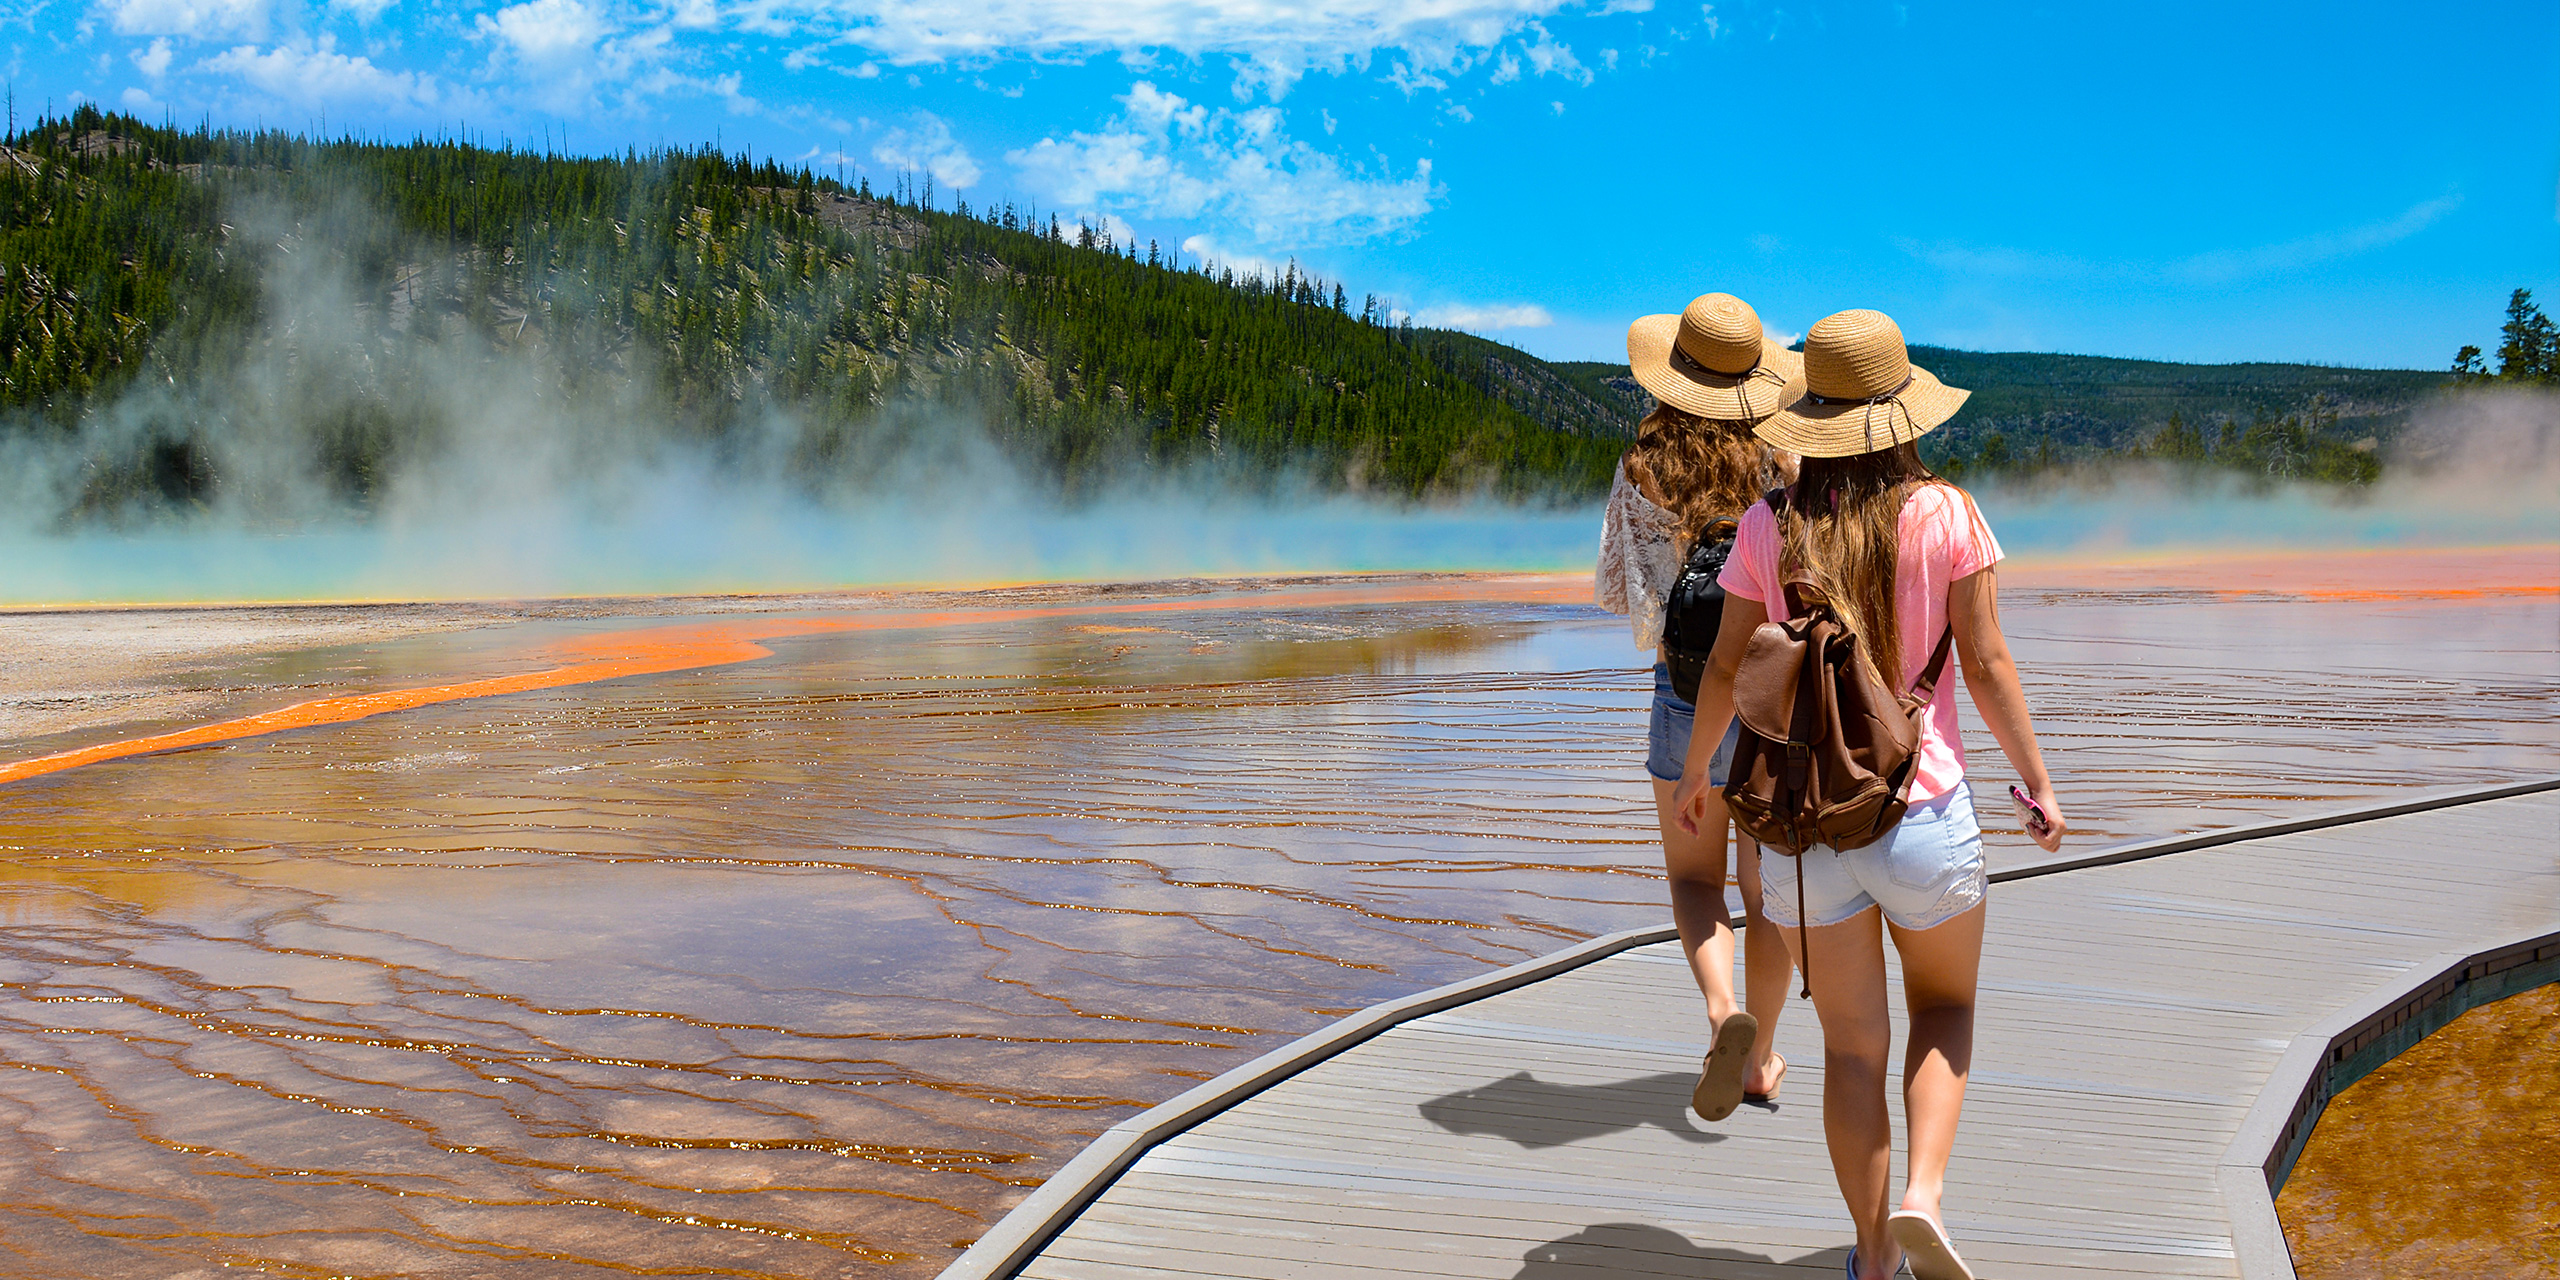 Grand Prismatic Spring at Yellowstone National Park; Courtesy of margaret.wiktor/Shutterstock